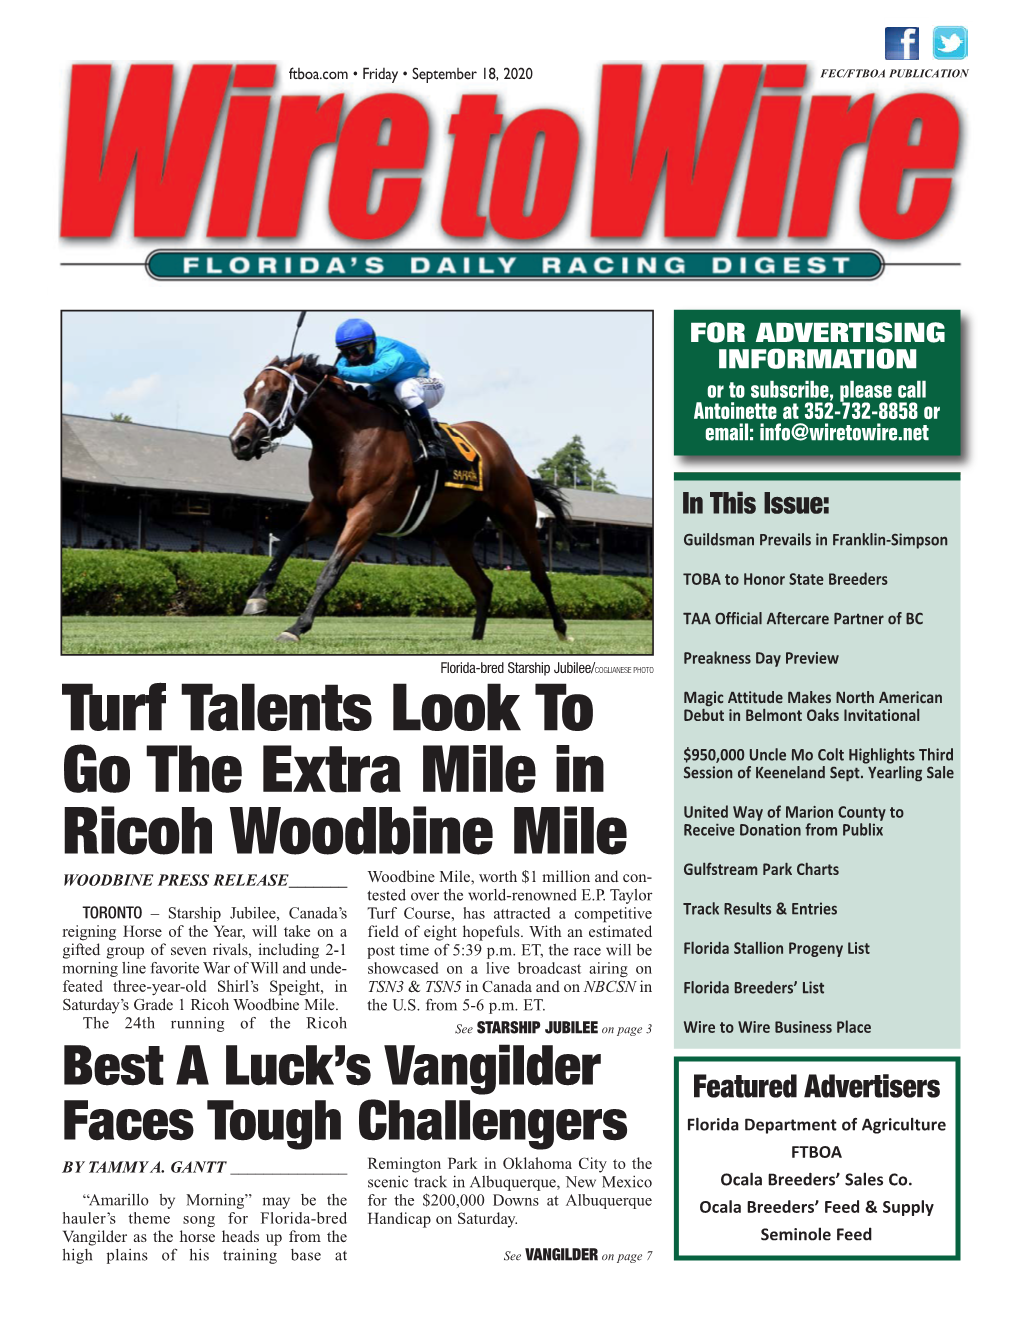 Turf Talents Look to Go the Extra Mile in Ricoh Woodbine Mile